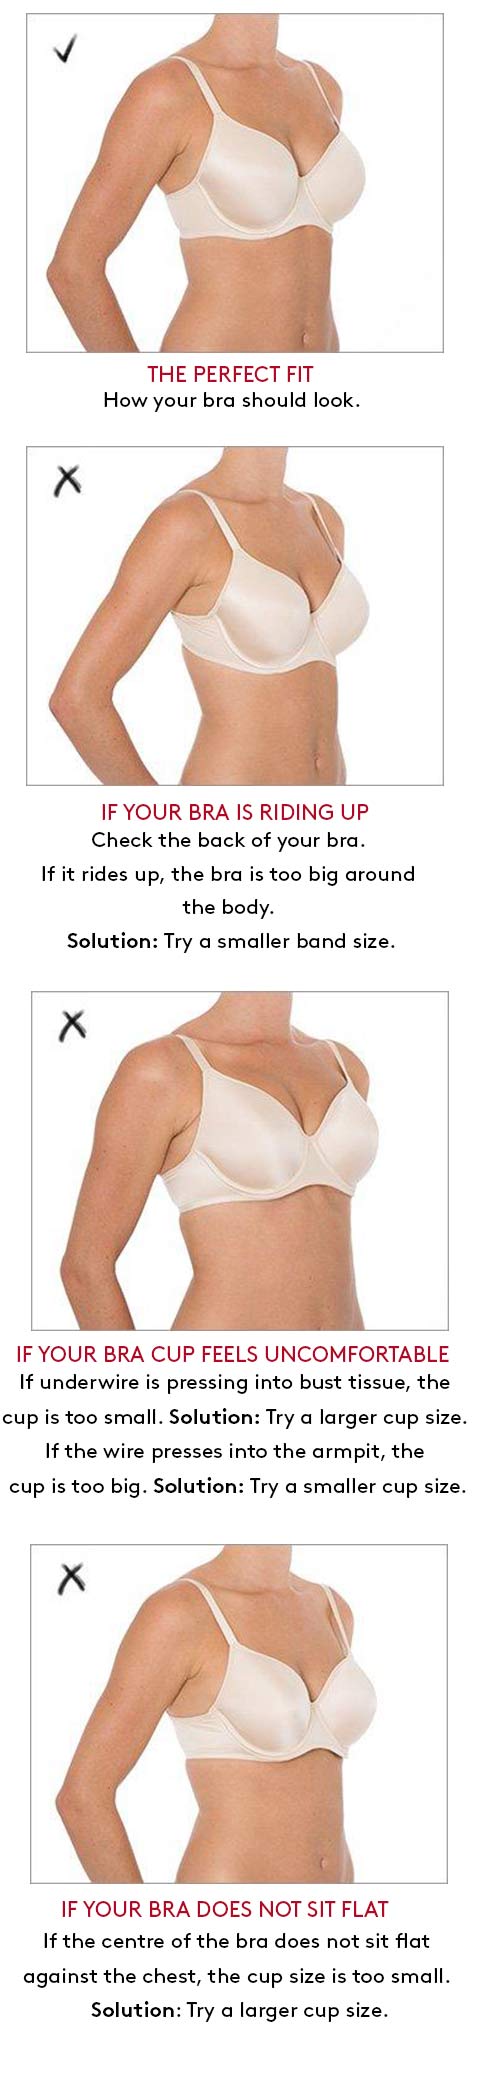 Not sure about bra size? - See the big bra guide here